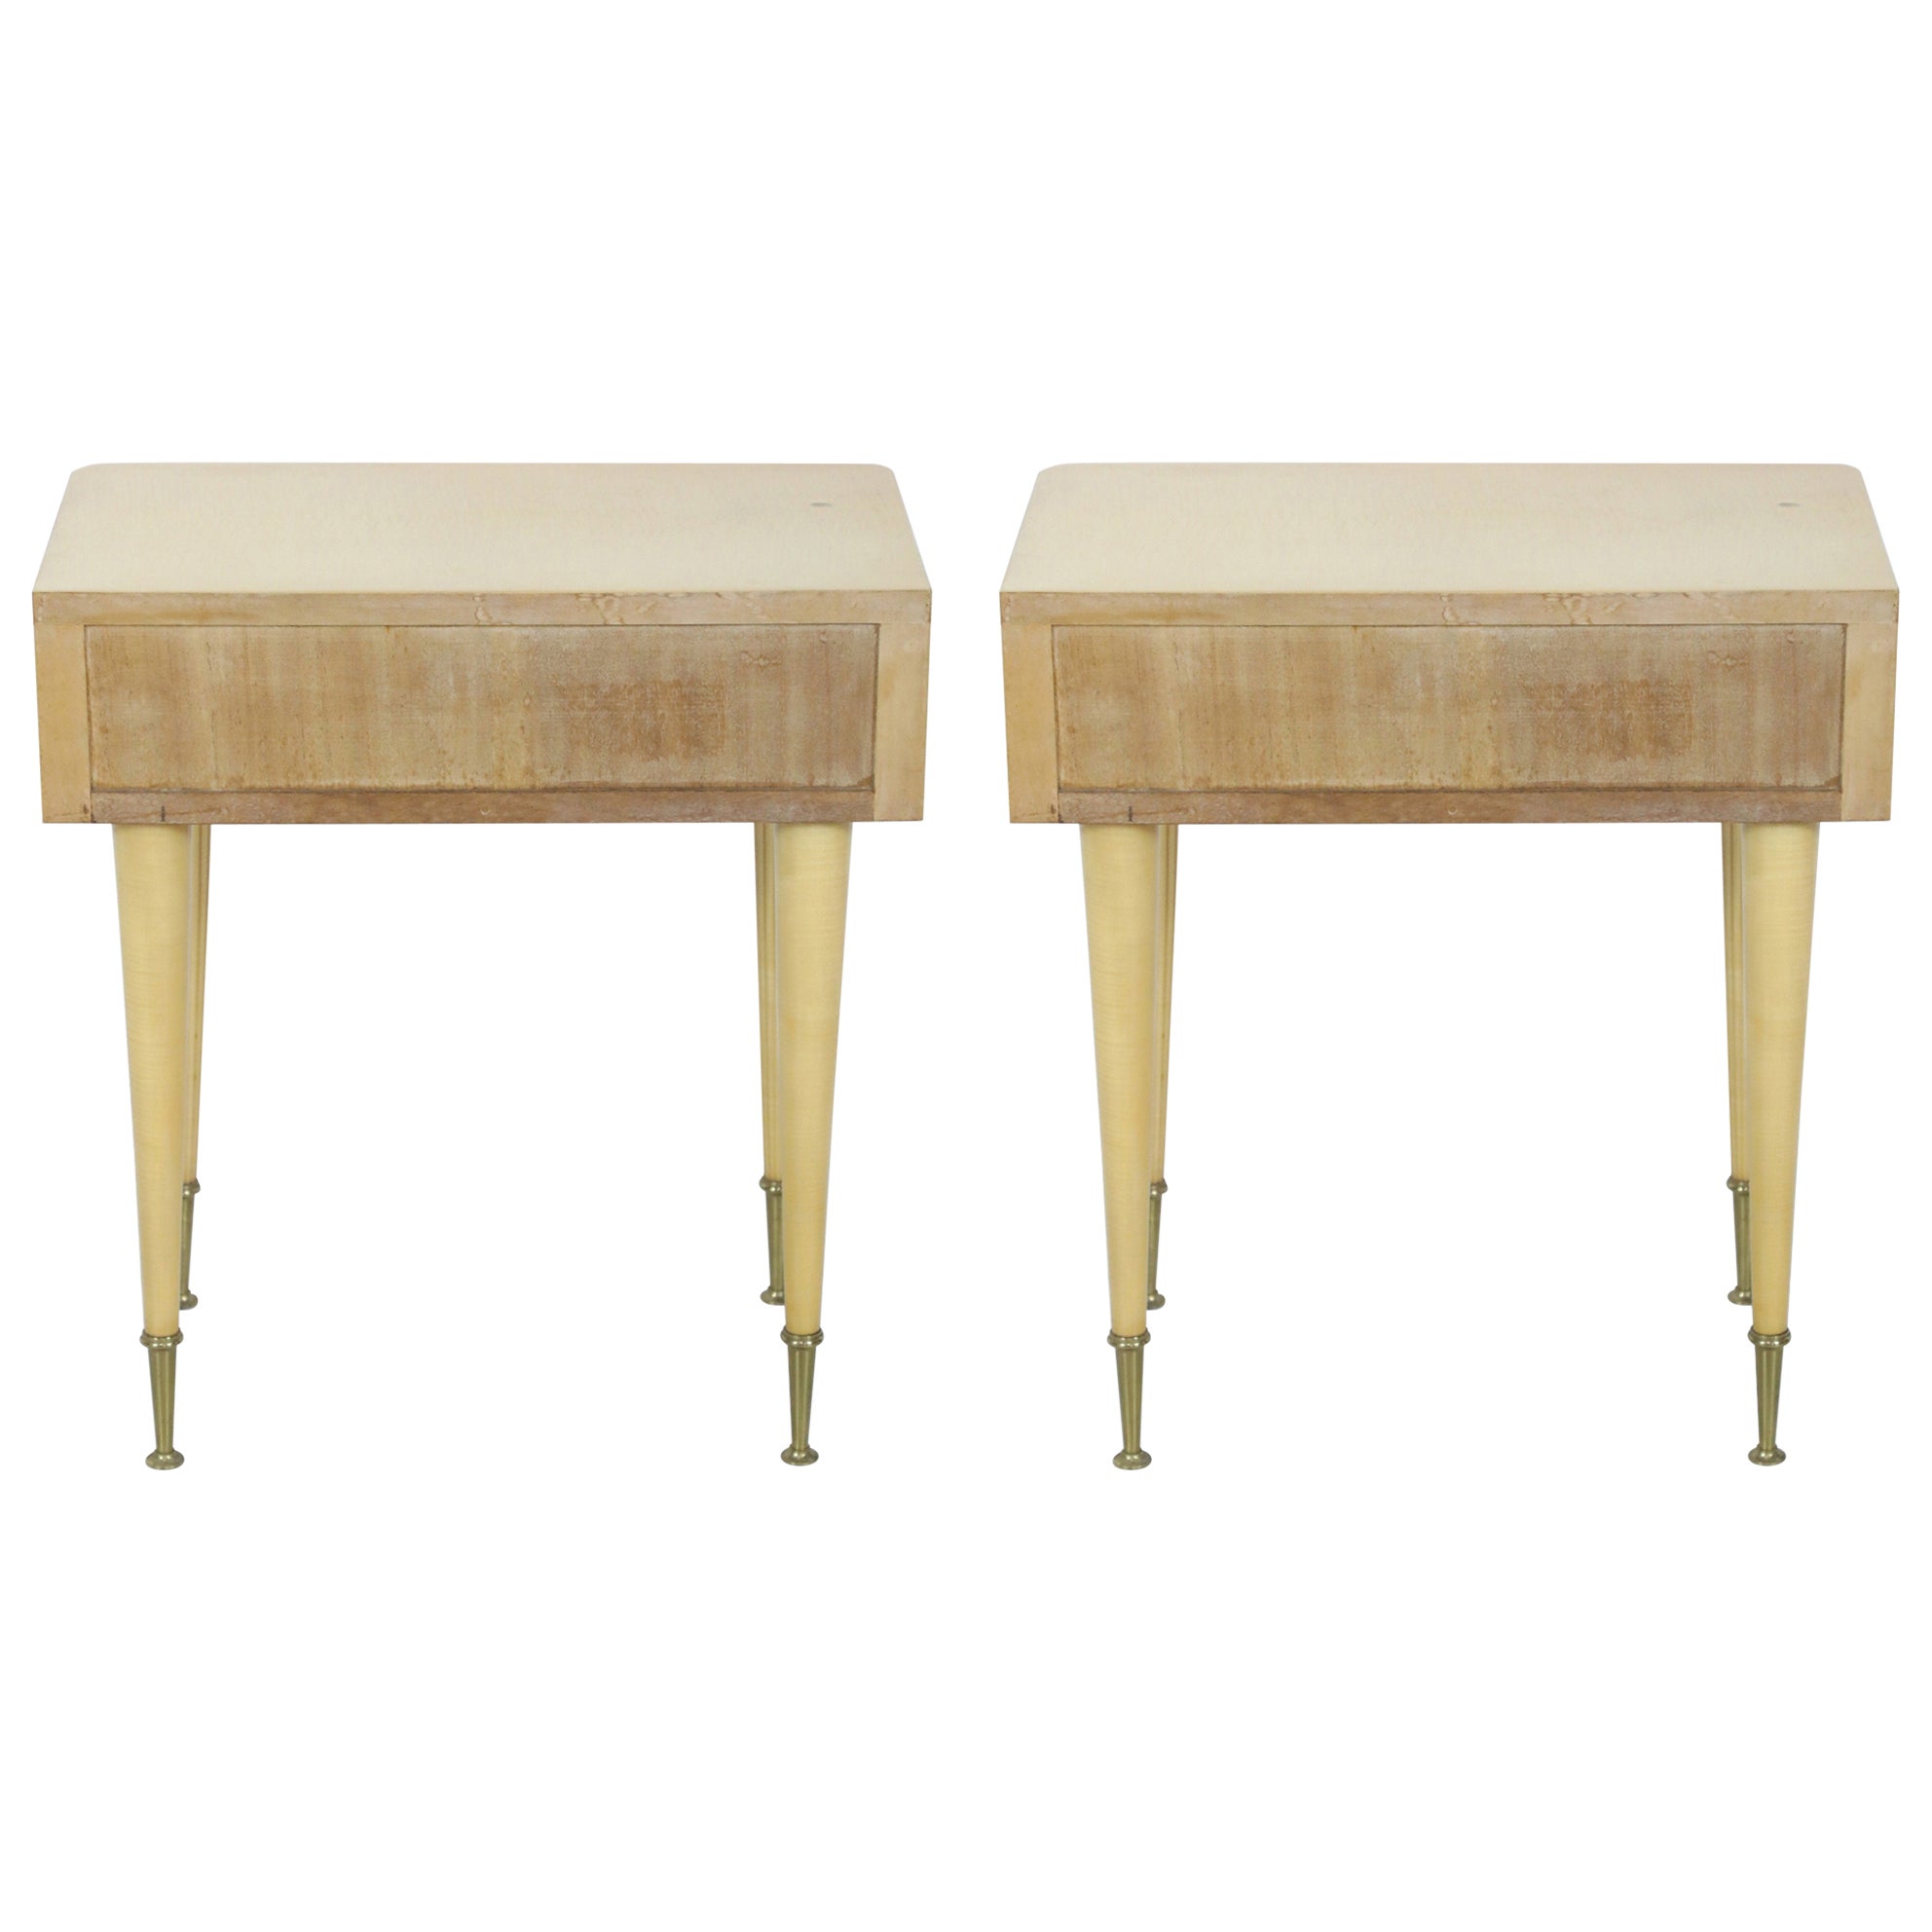 Pair of French Art Deco Style Maple End Tables